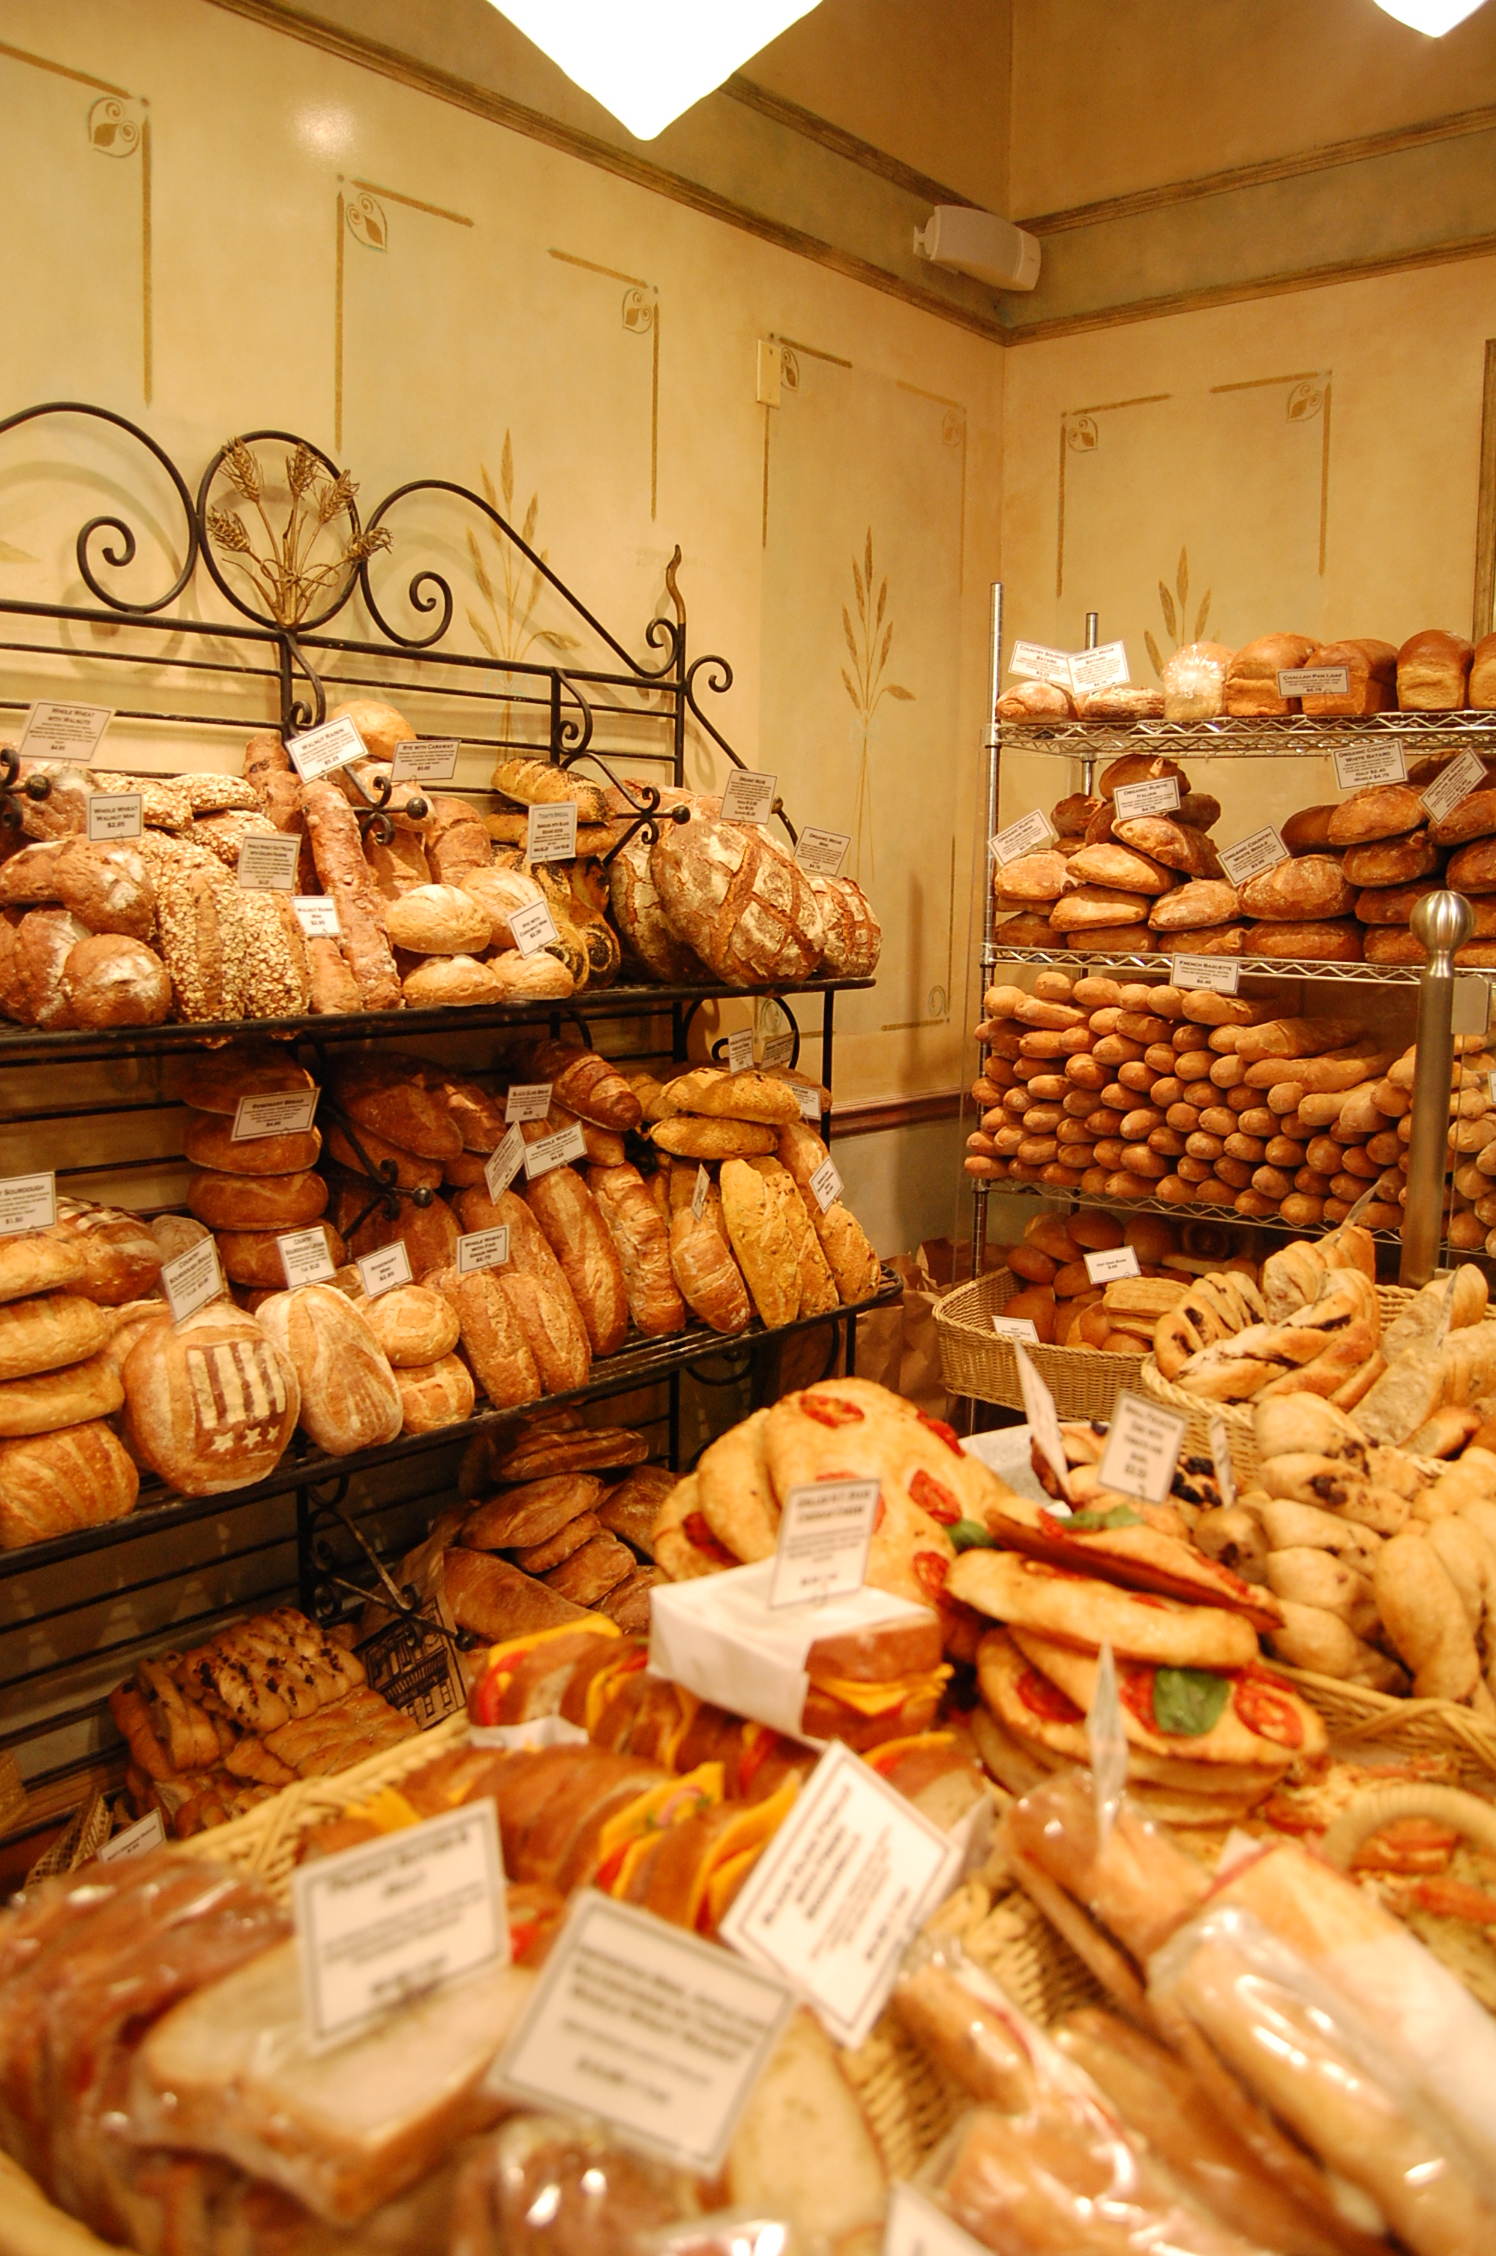 bread and pastries displayed on display in an indoor market